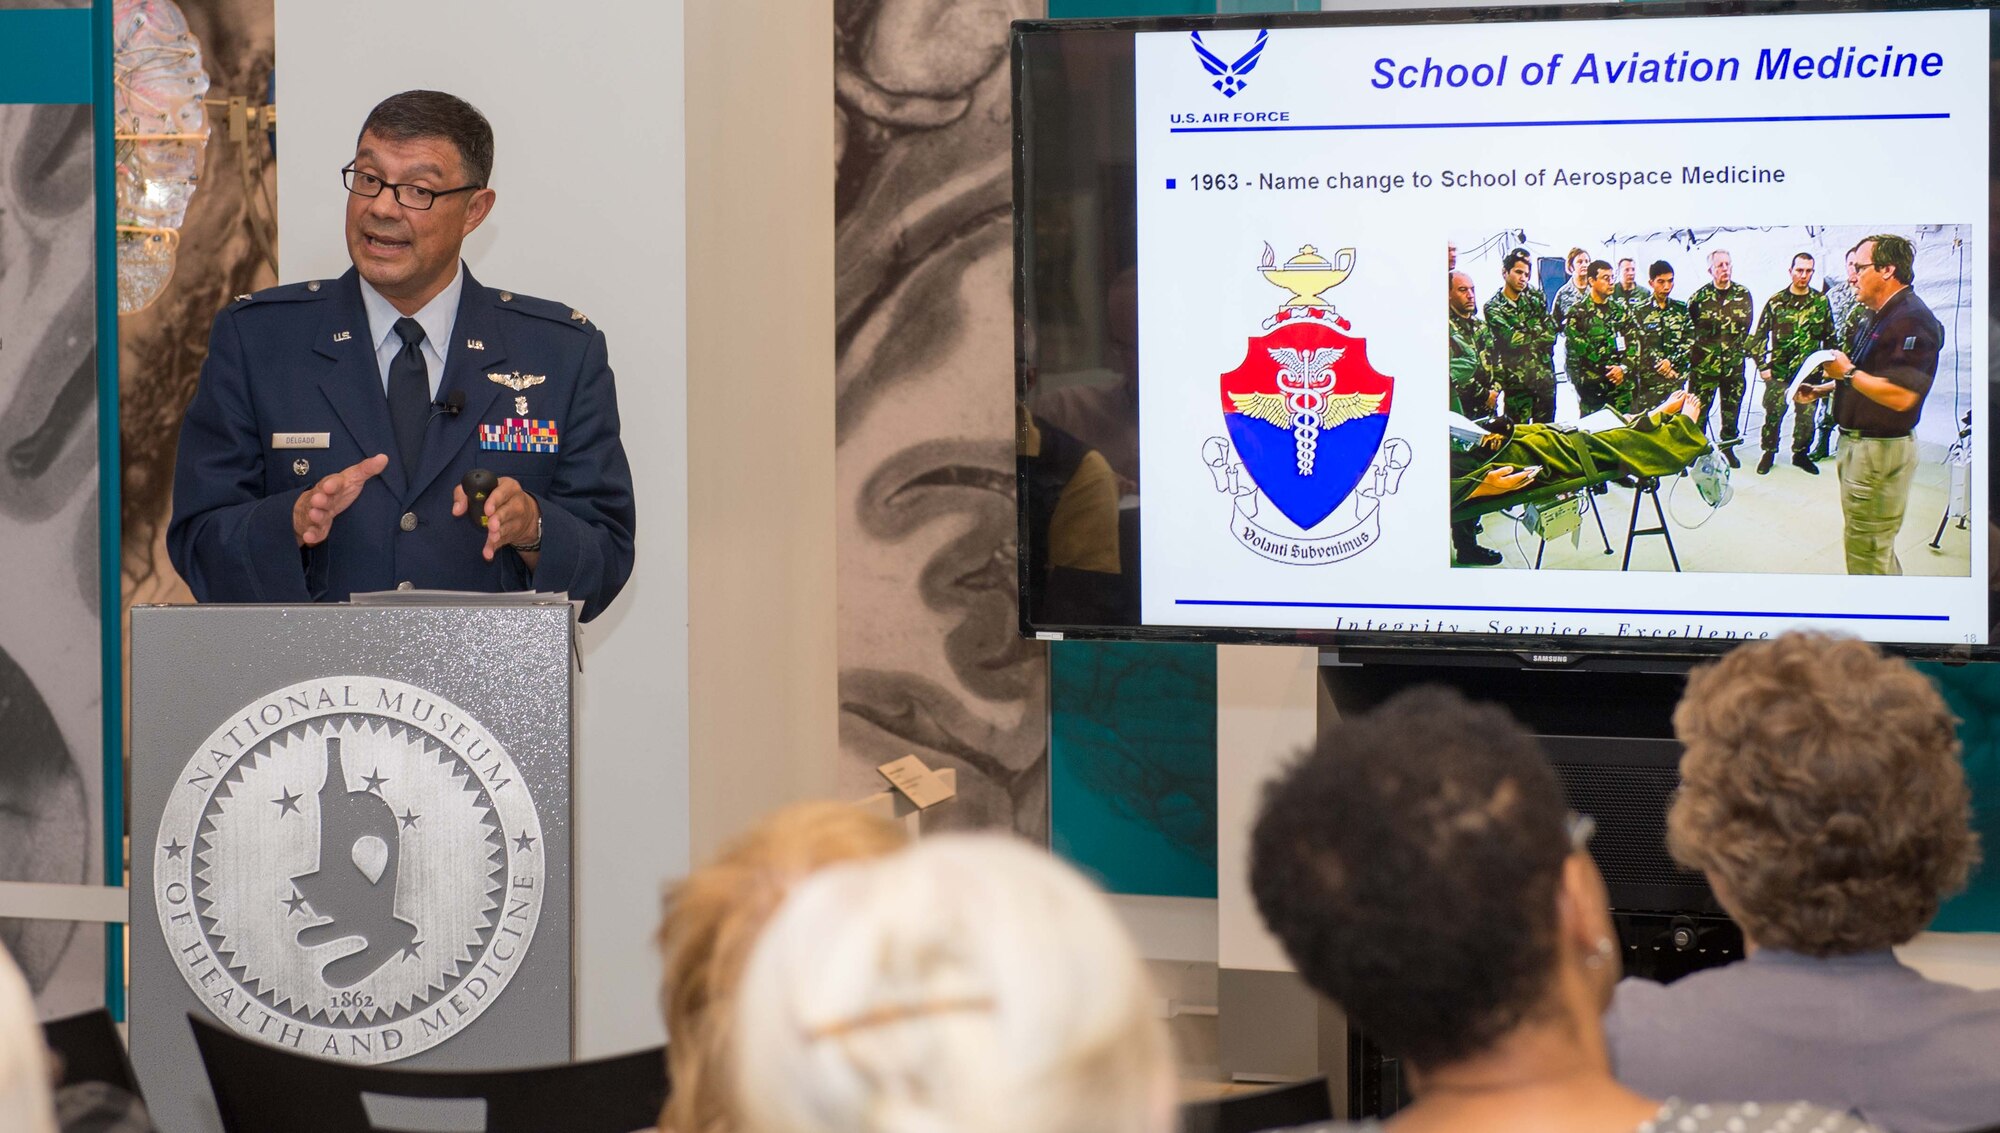 September 2016 Science Cafe.                      
U.S. Air Force Col. Antonio Jose Delgado, Medical Corps, the interim director of the International Health Specialist Program at the Air Force Medical Support Agency, spoke about global health engagement during the September Medical Museum Science Café, at the National Museum of Health and Medicine on Tuesday, Sept. 27, 2016. (Disclosure: This image has been cropped to emphasize the subject.) (National Museum of Health and Medicine photo by Matthew Breitbart/ Released)